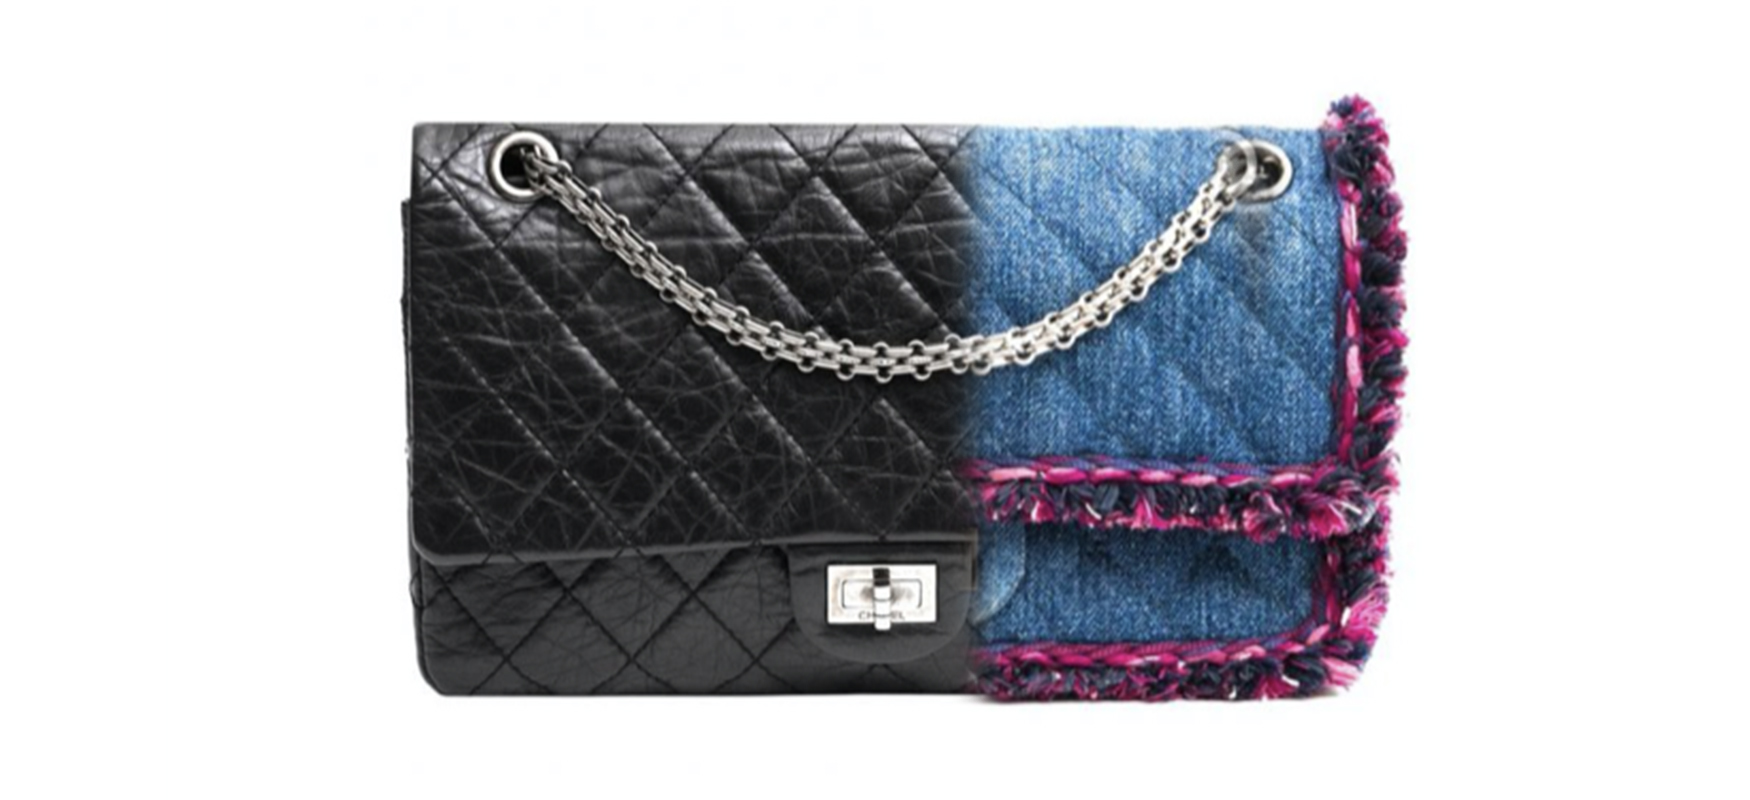 Ultimate Bag Guide: Classic Chanel